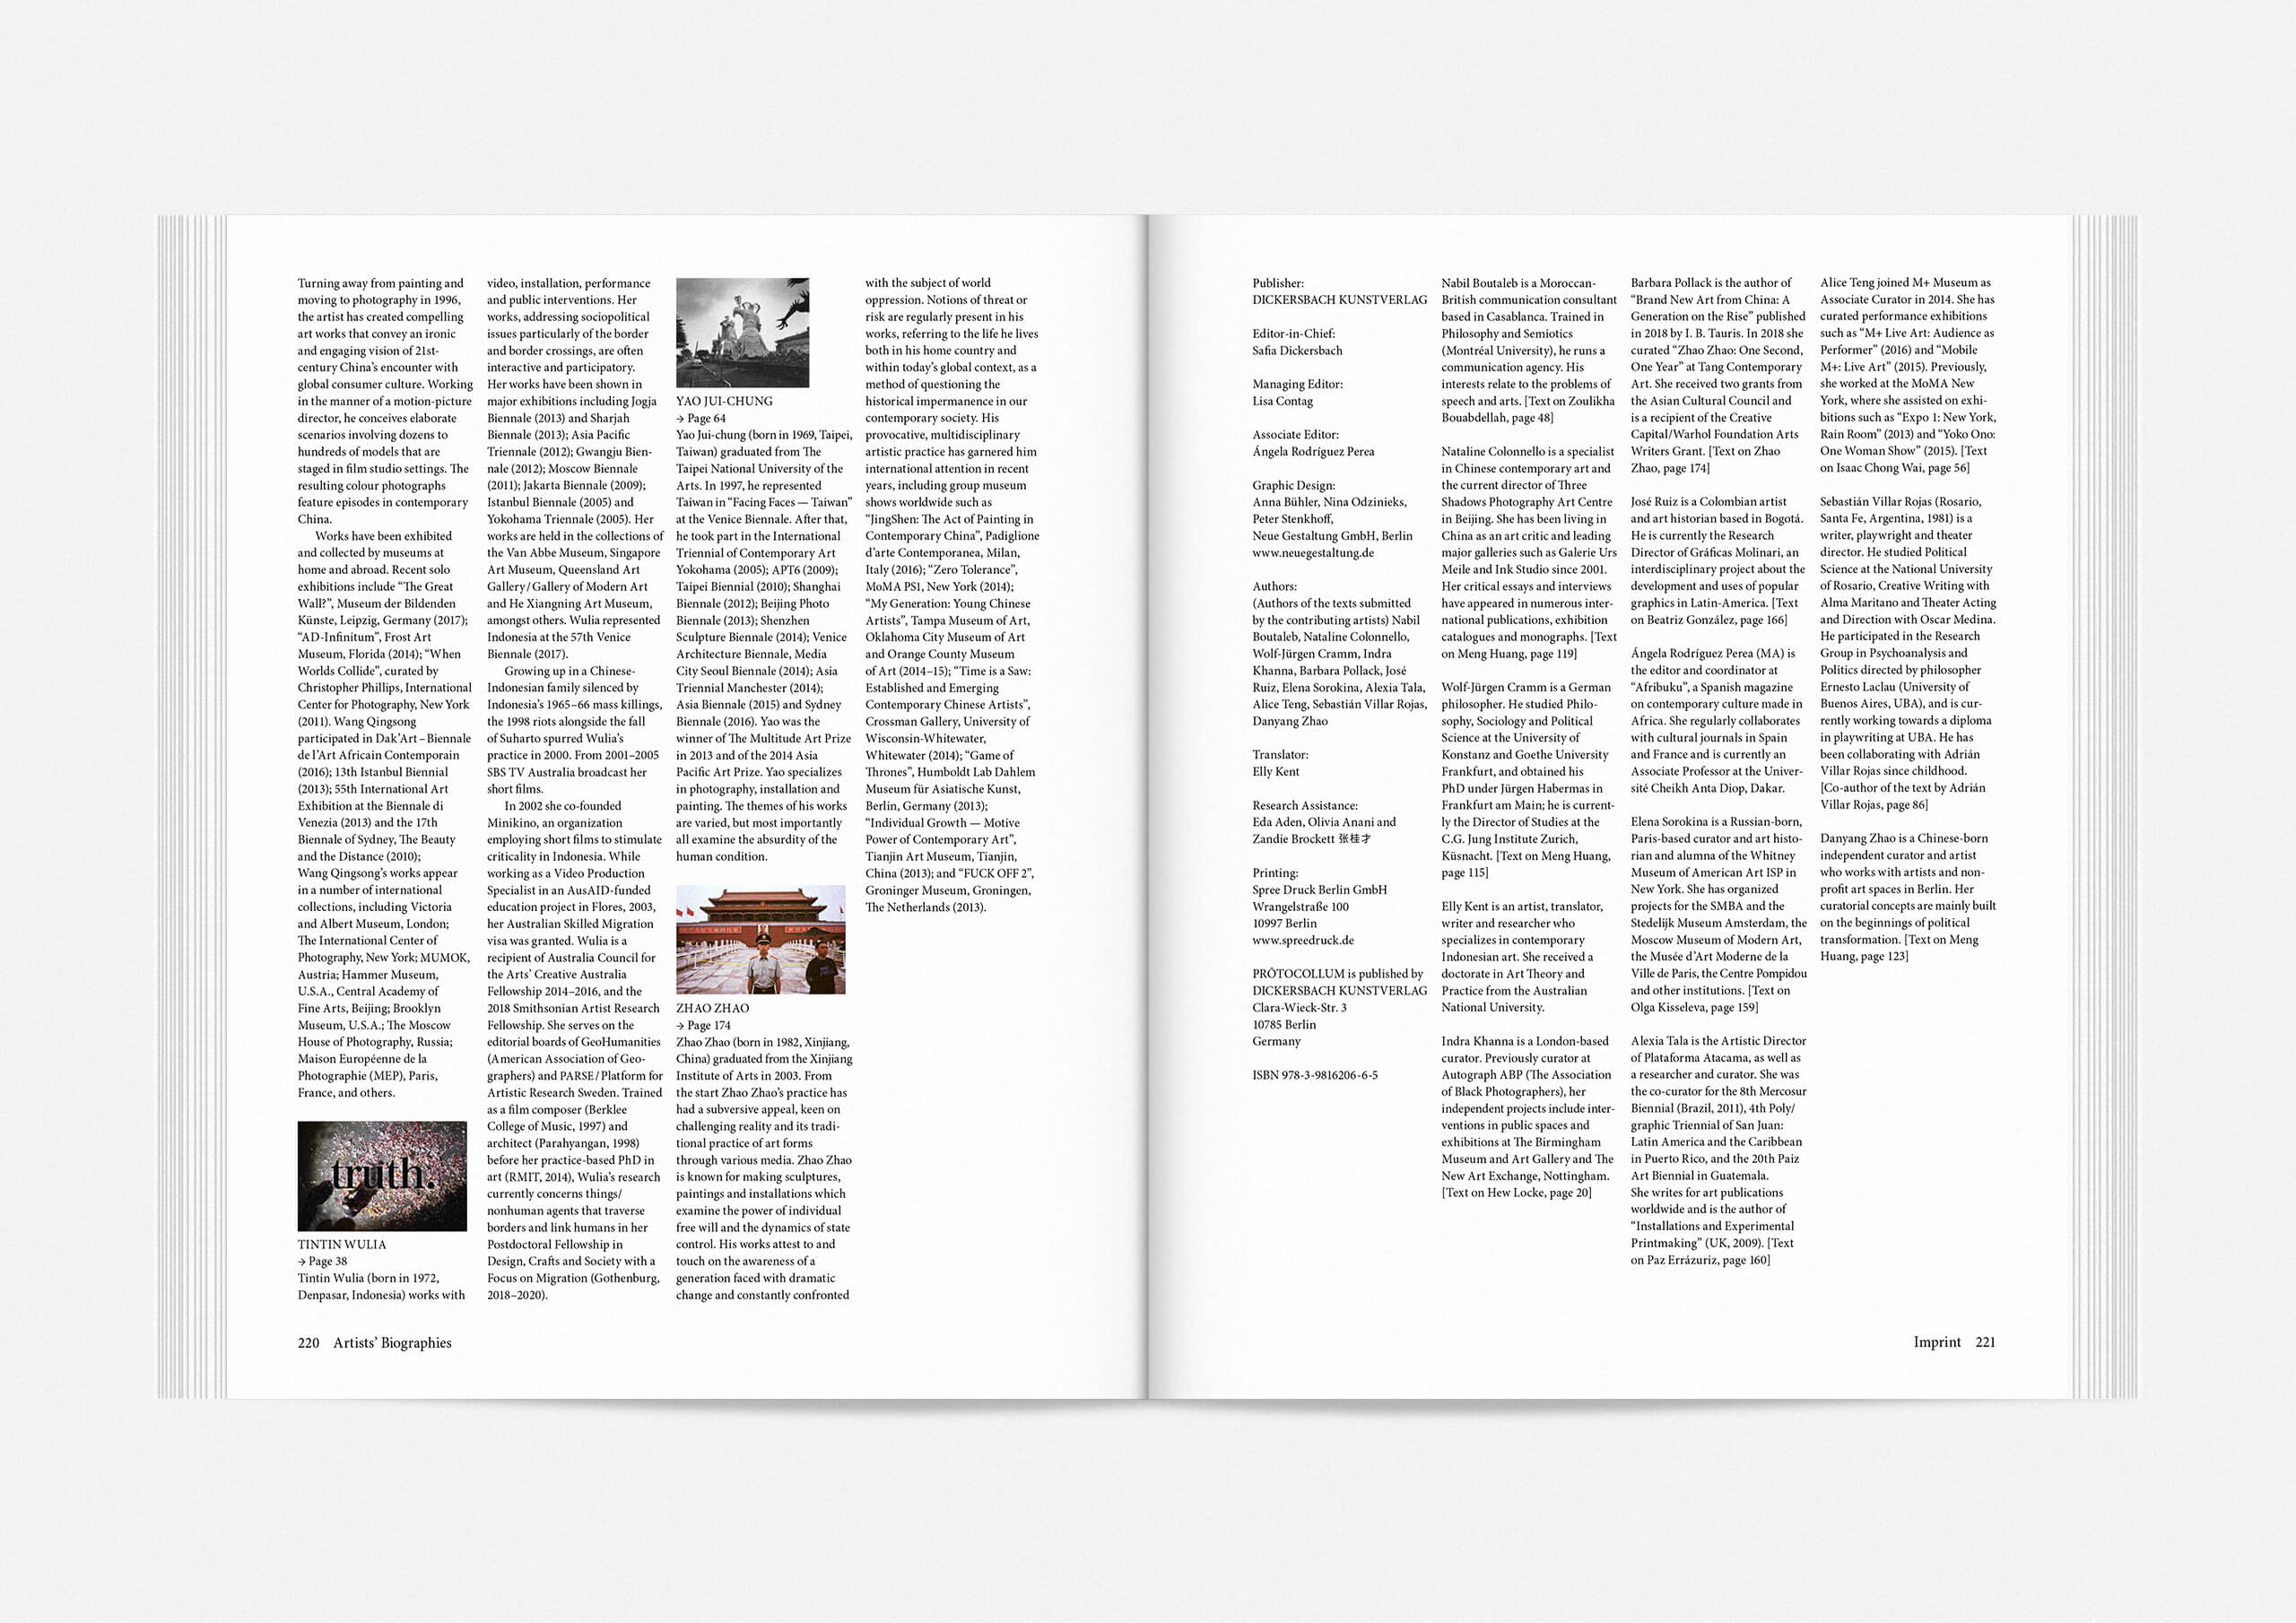 https://neuegestaltung.de/media/pages/clients/protocollum-issue-no-05/034aad7bde-1710175849/protocollum-5-page-220221-ng.jpg